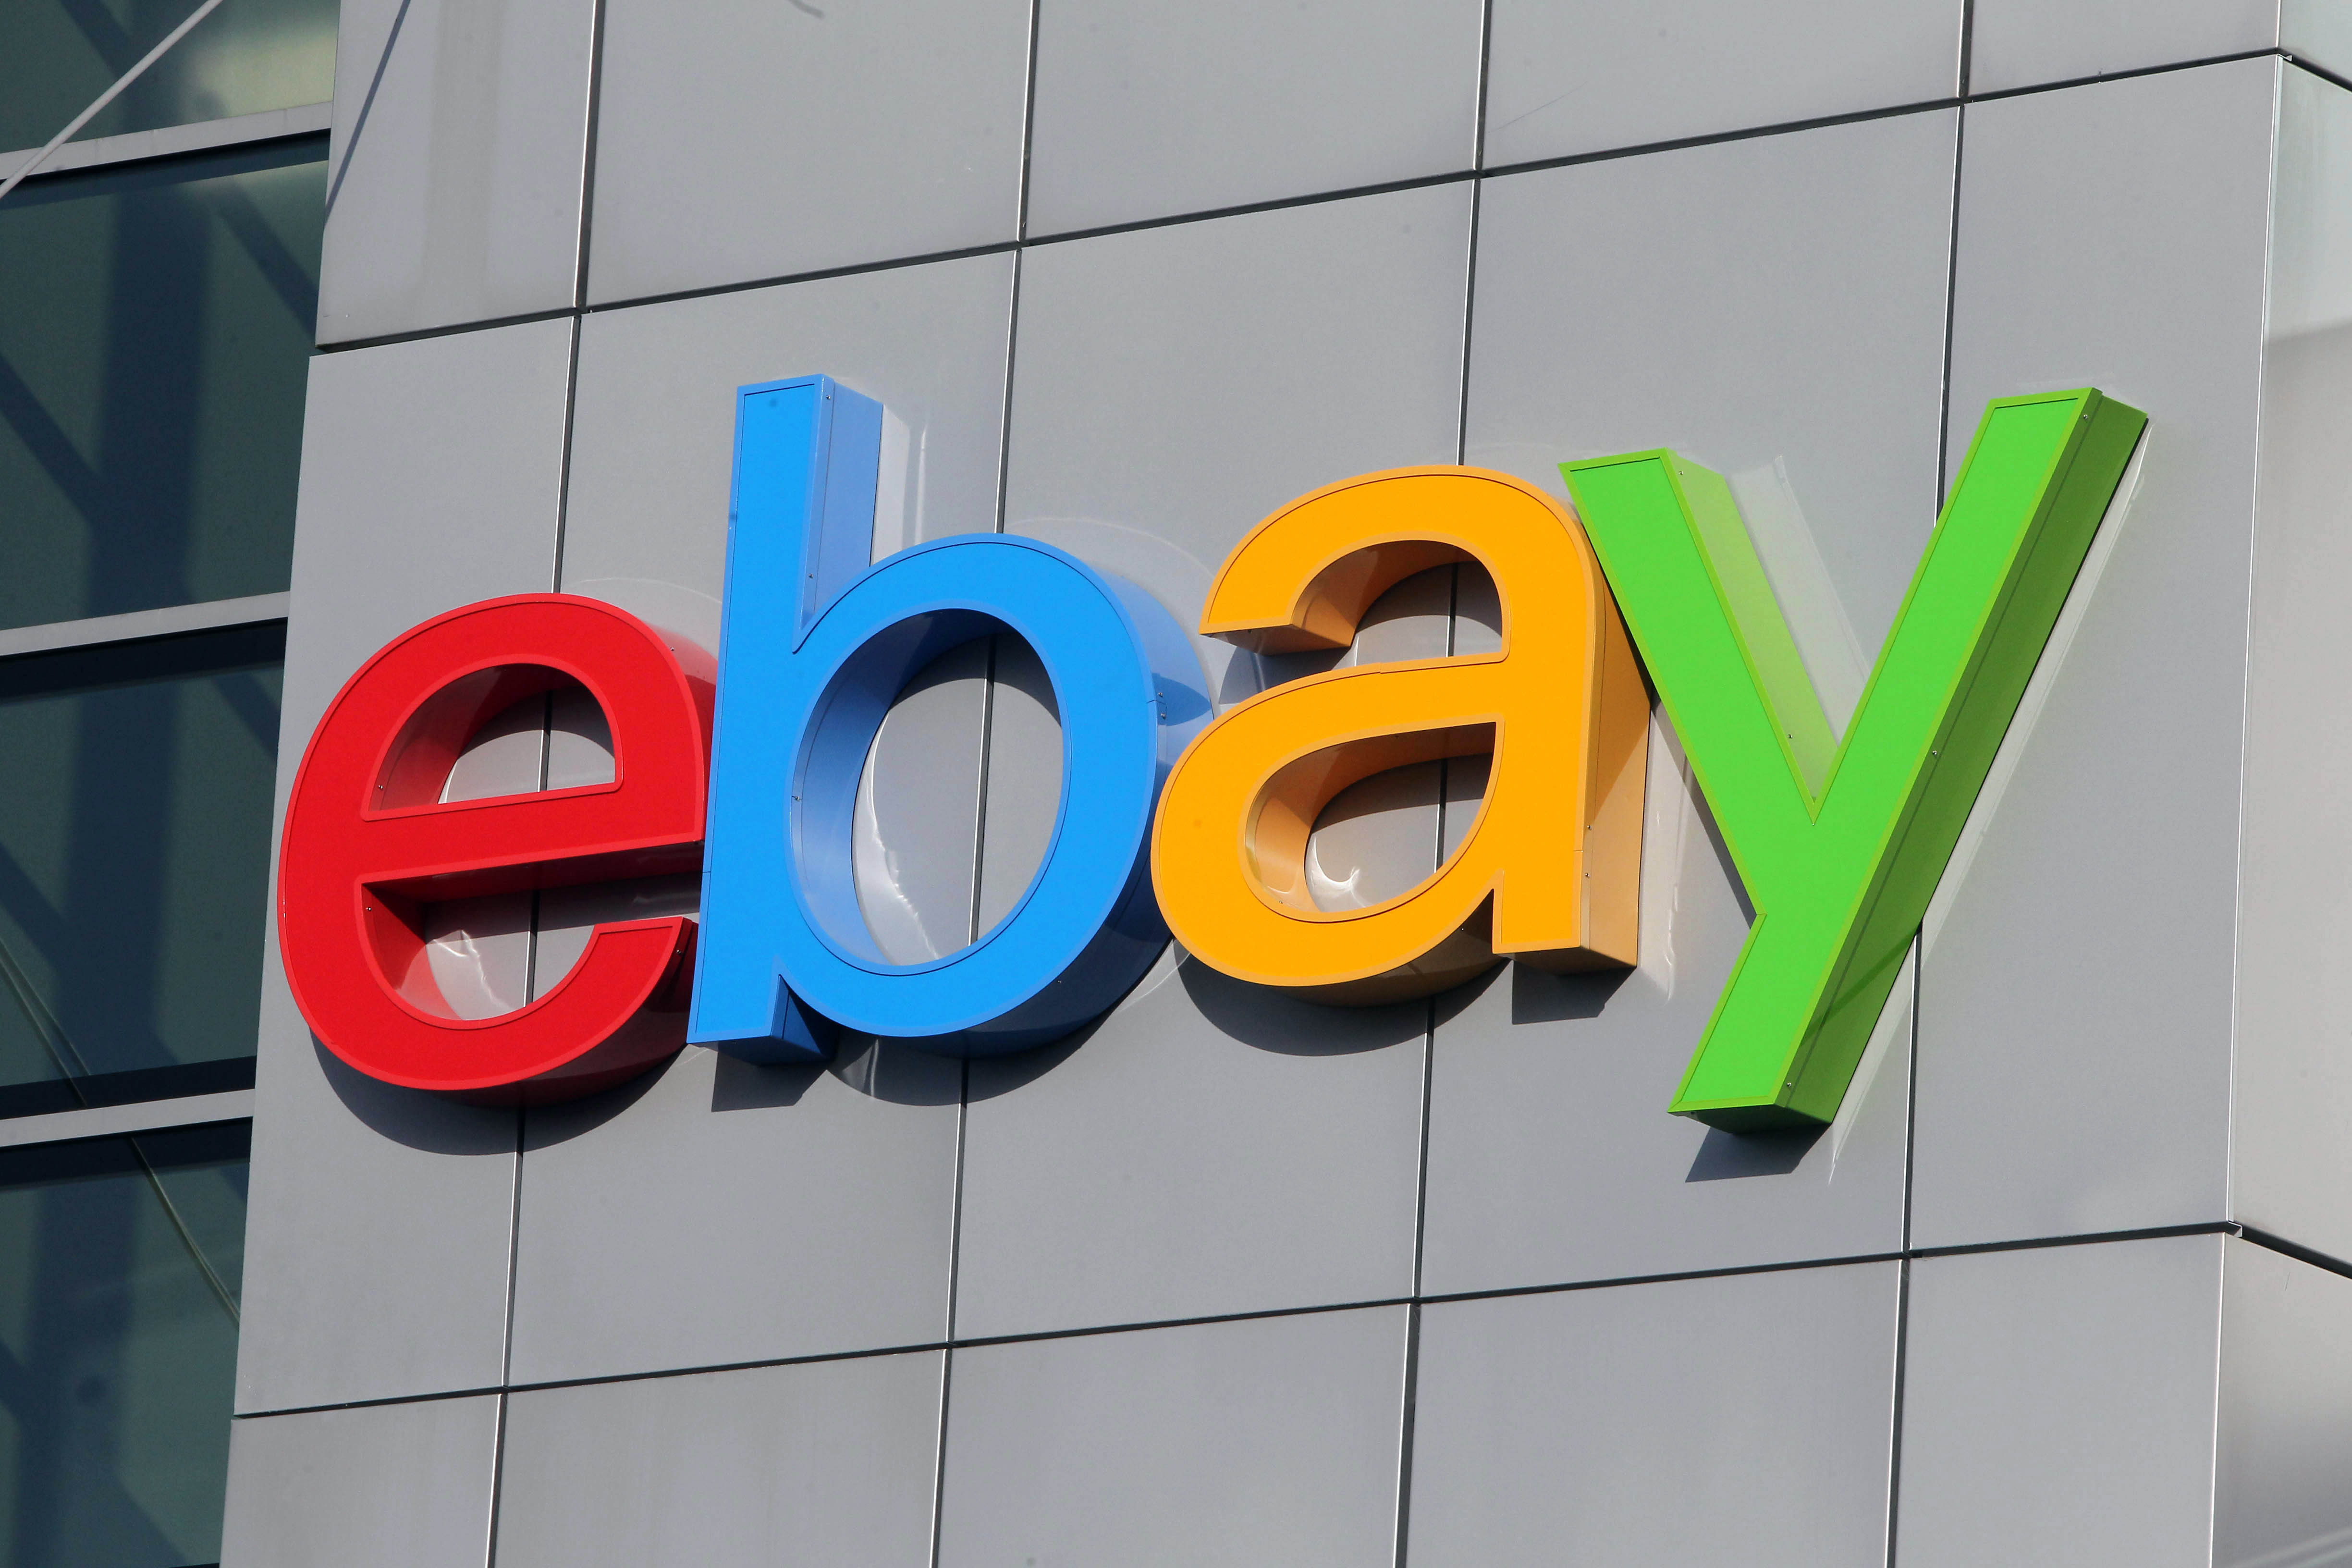 eBay DOWN - Auction site not working for thousands of 